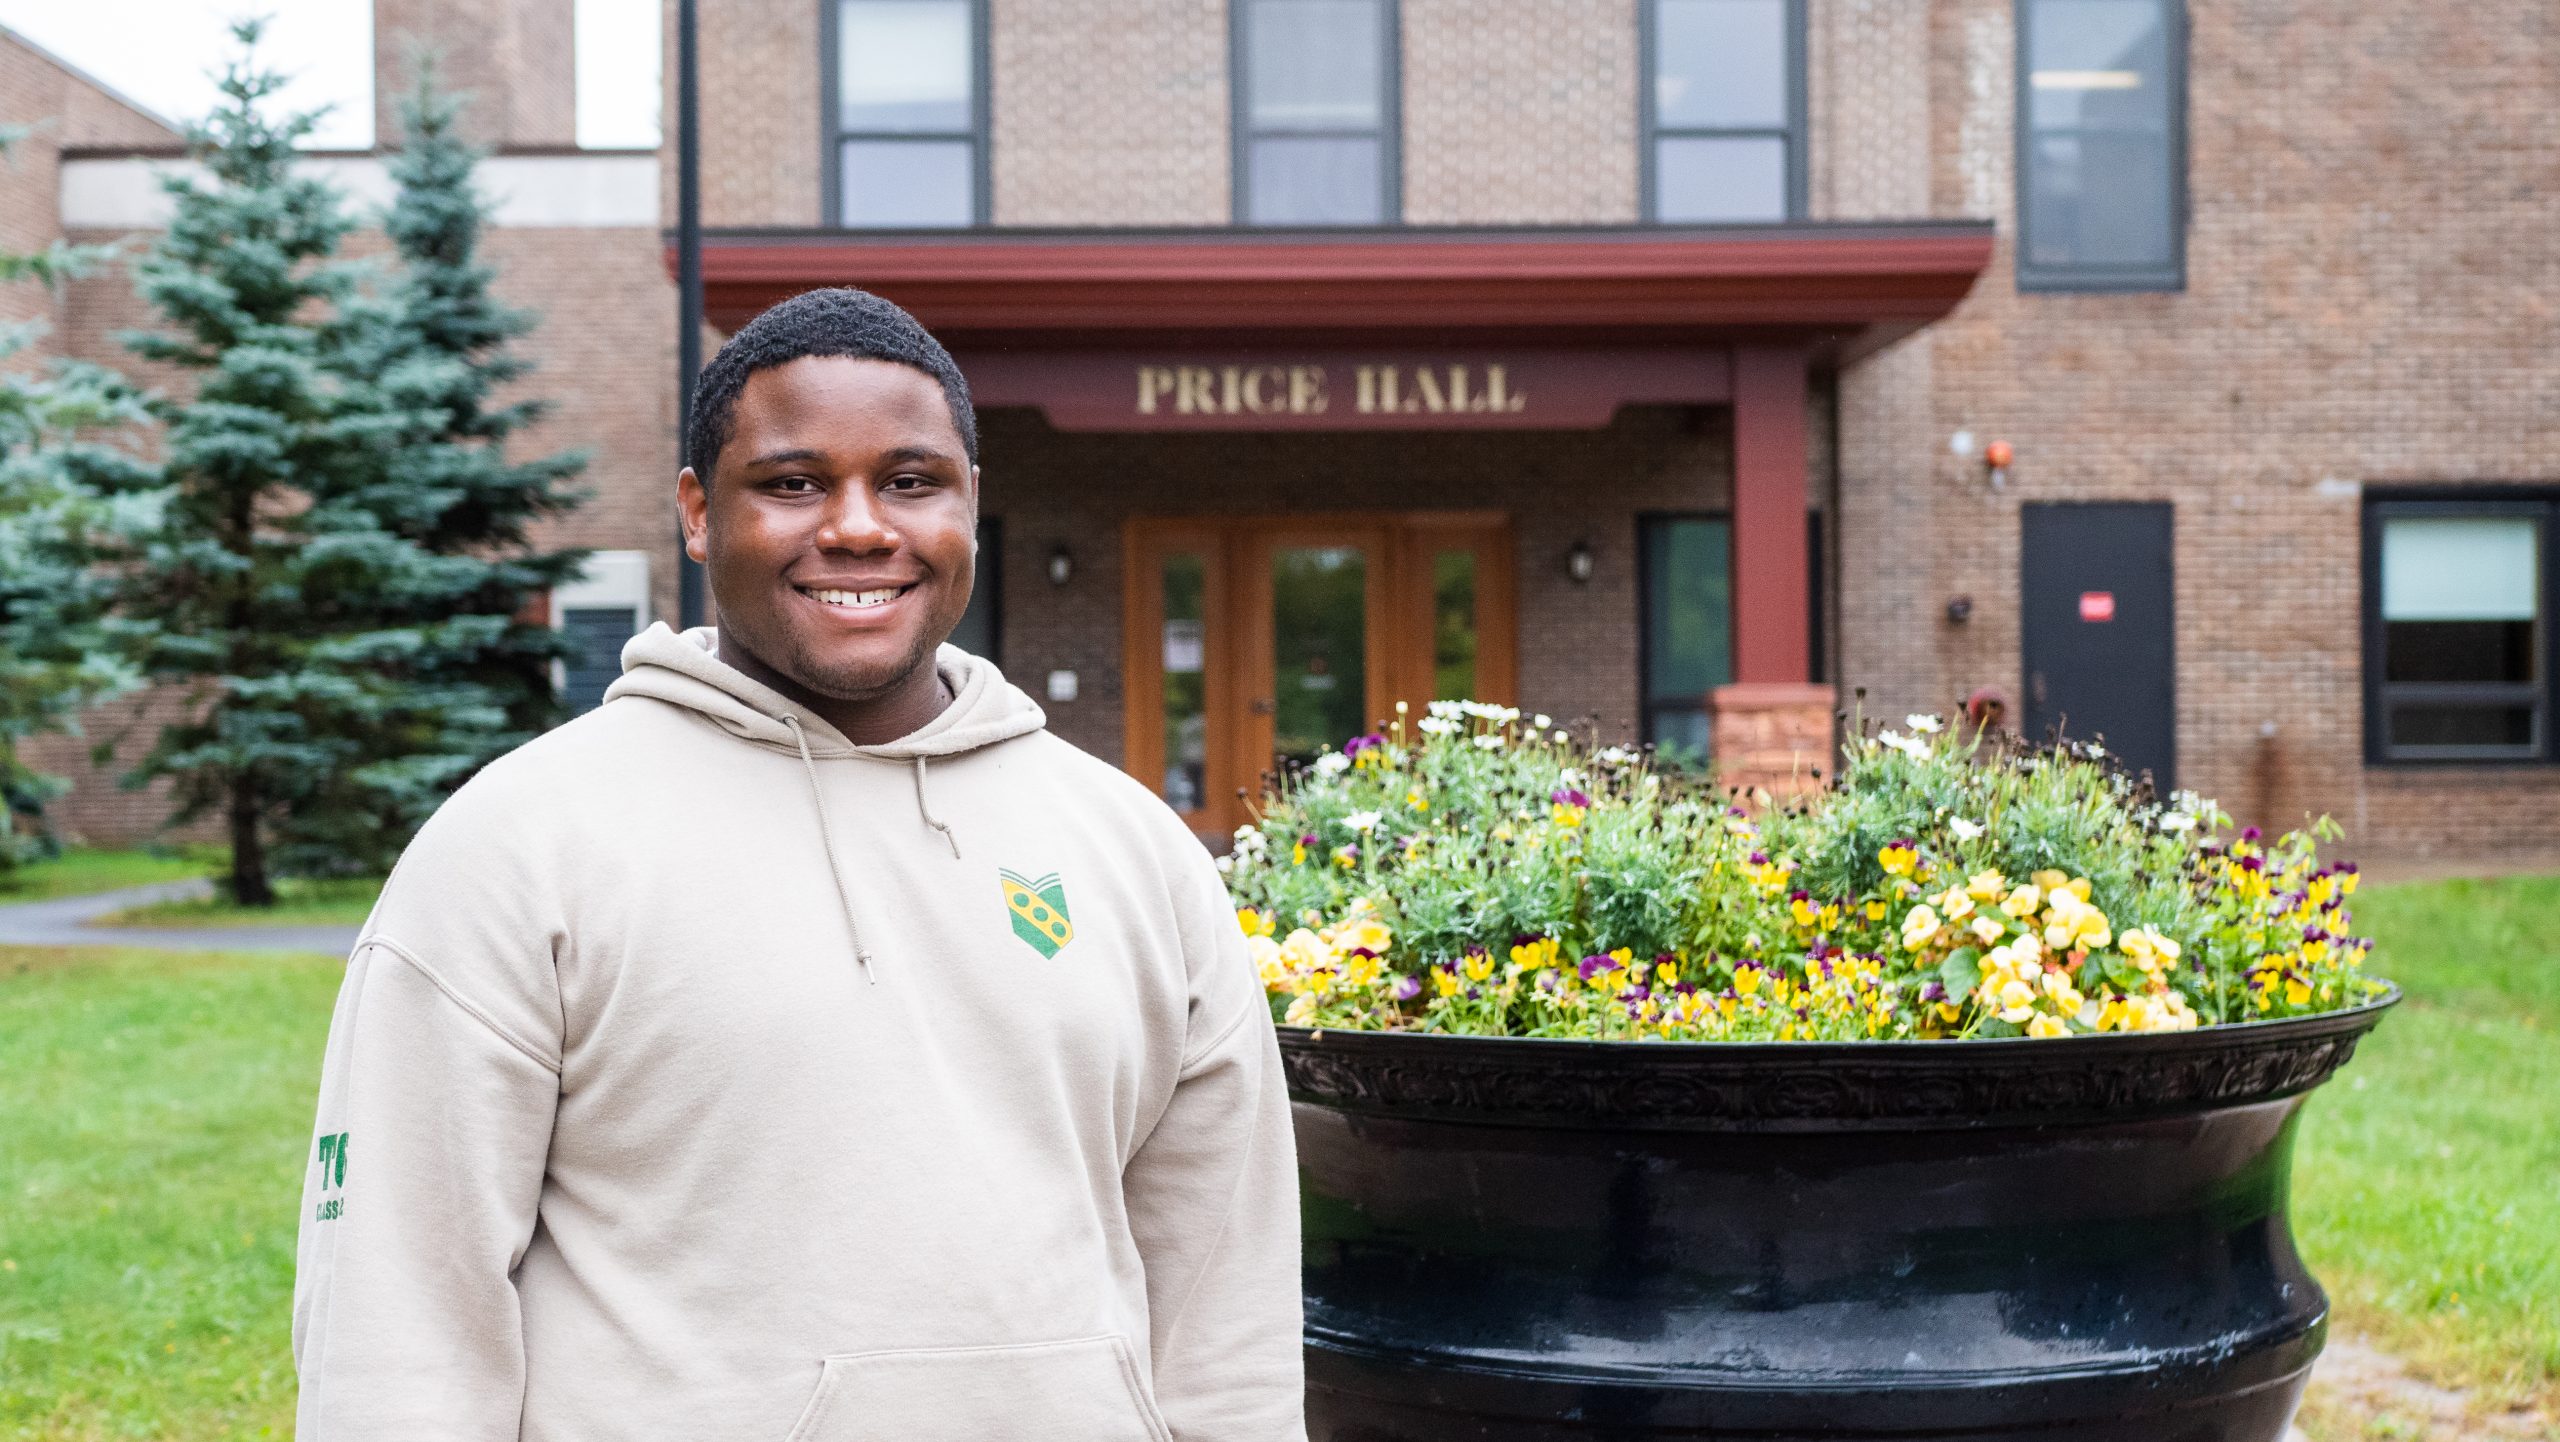 Devaun Baker, a Clarkson University student posing in front of the Price Hall building.